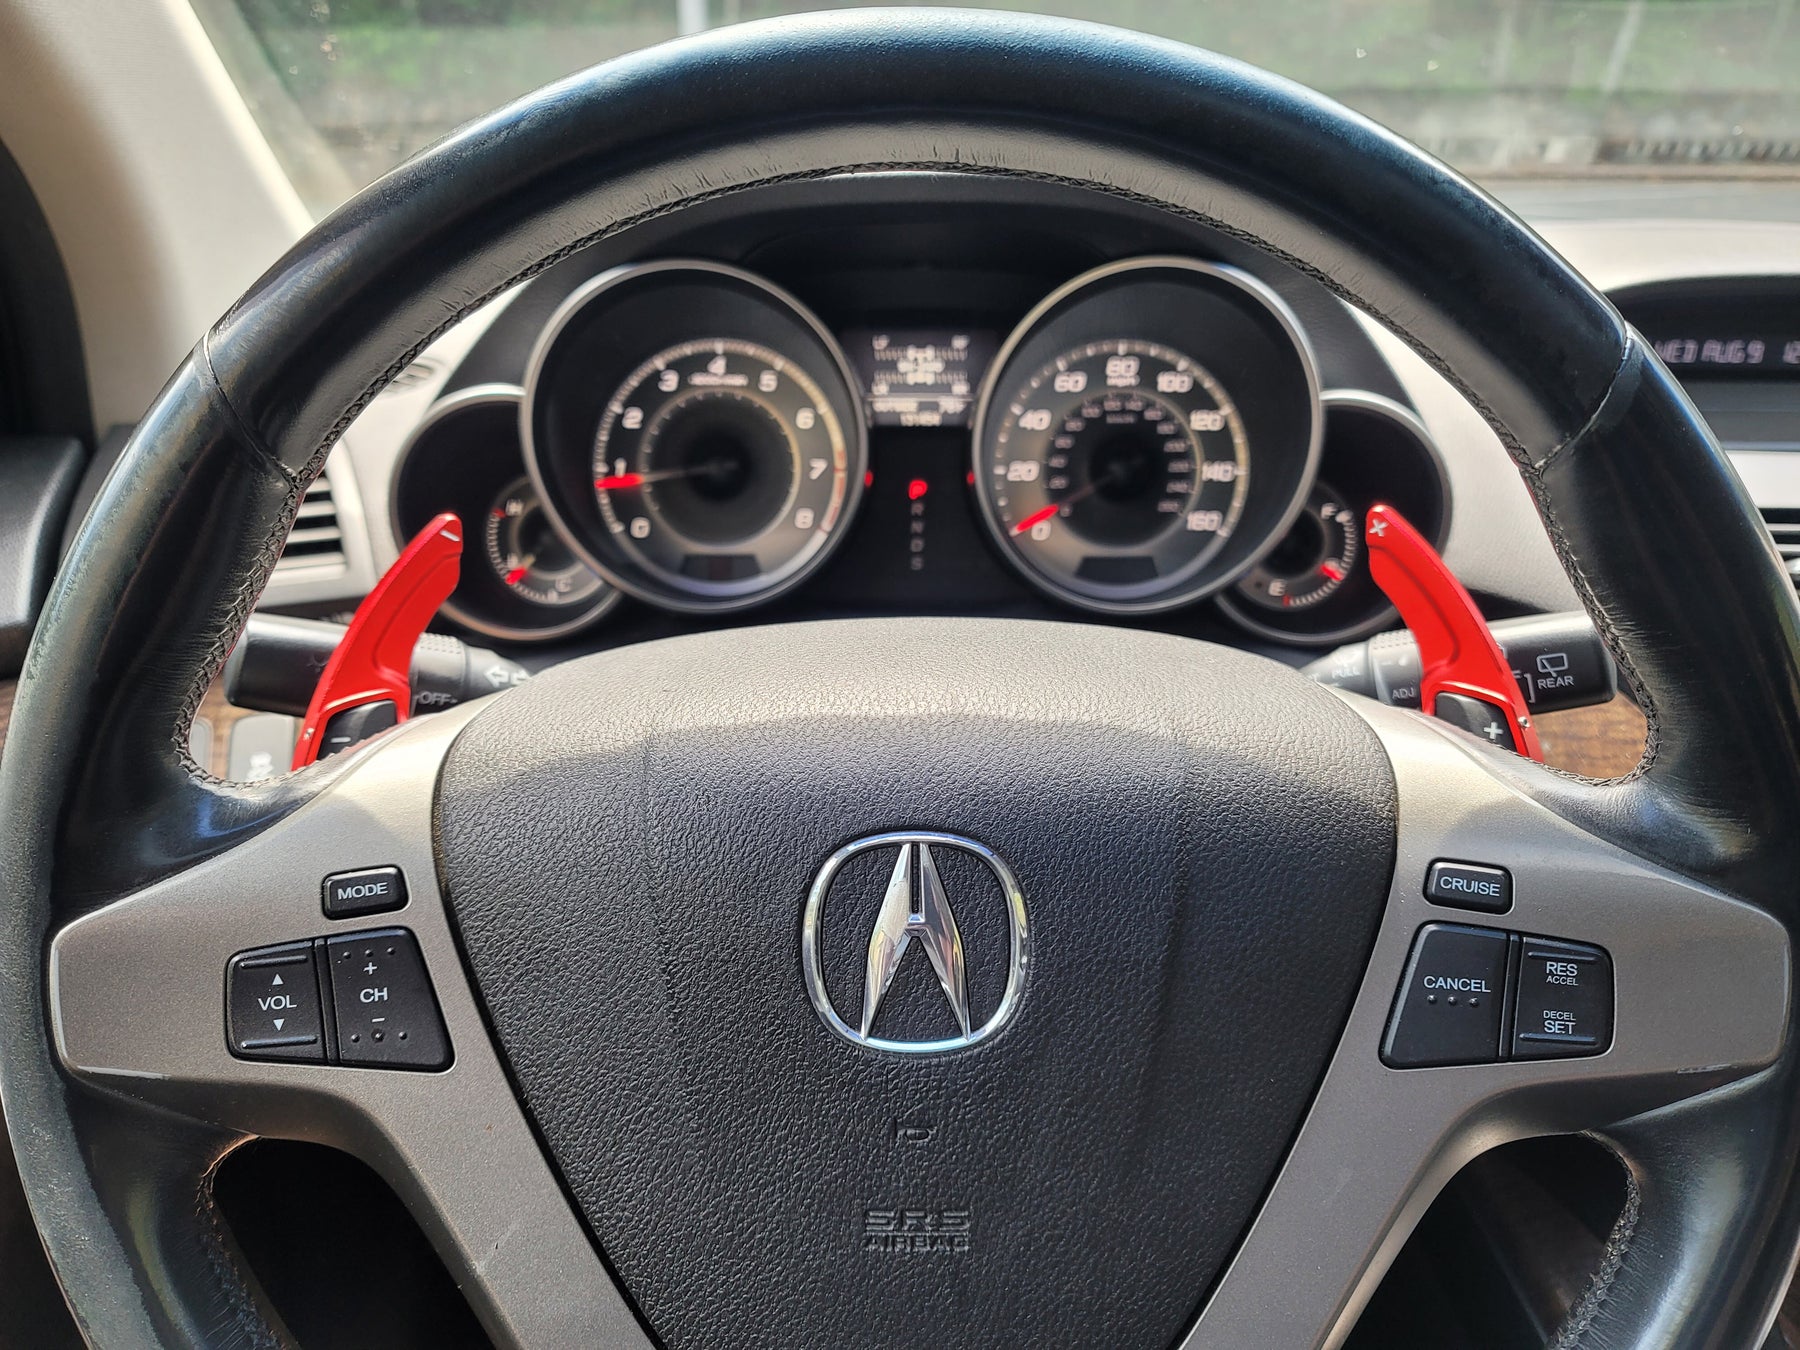 2012 Acura MDX Installed A-Spec Red Steering Wheel Paddle Shifter Extension